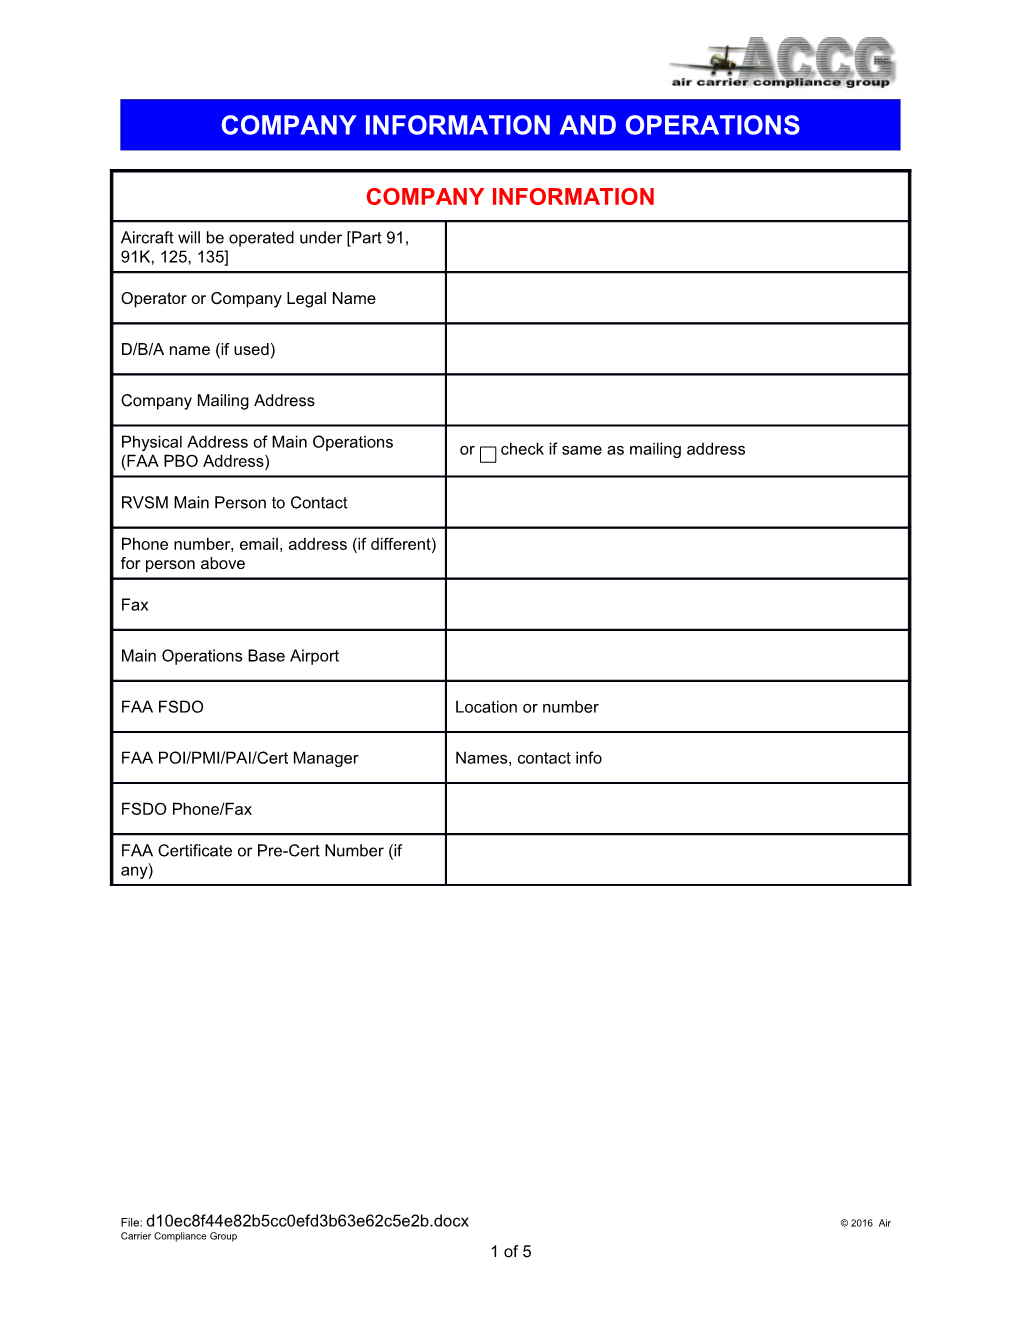 Companyinformation and Operations